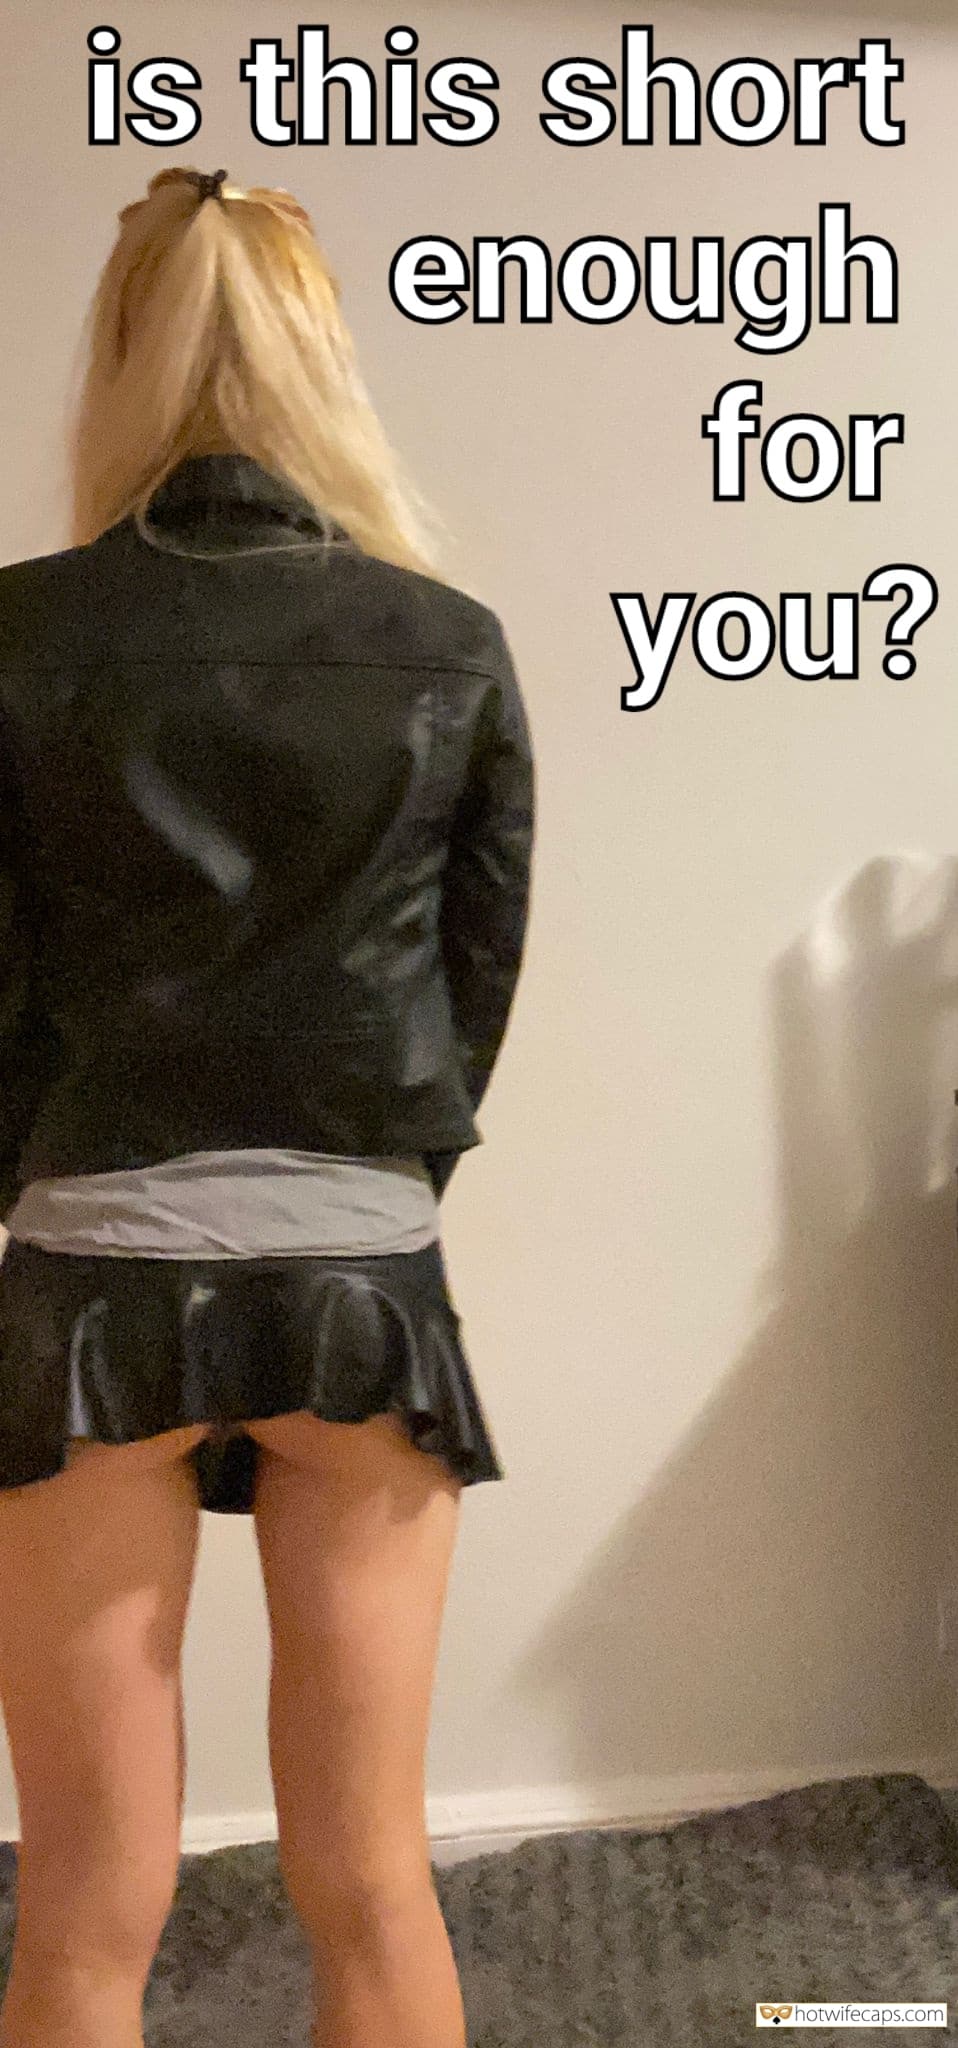 short skirt no panties captions, memes and dirty quotes on HotwifeCaps